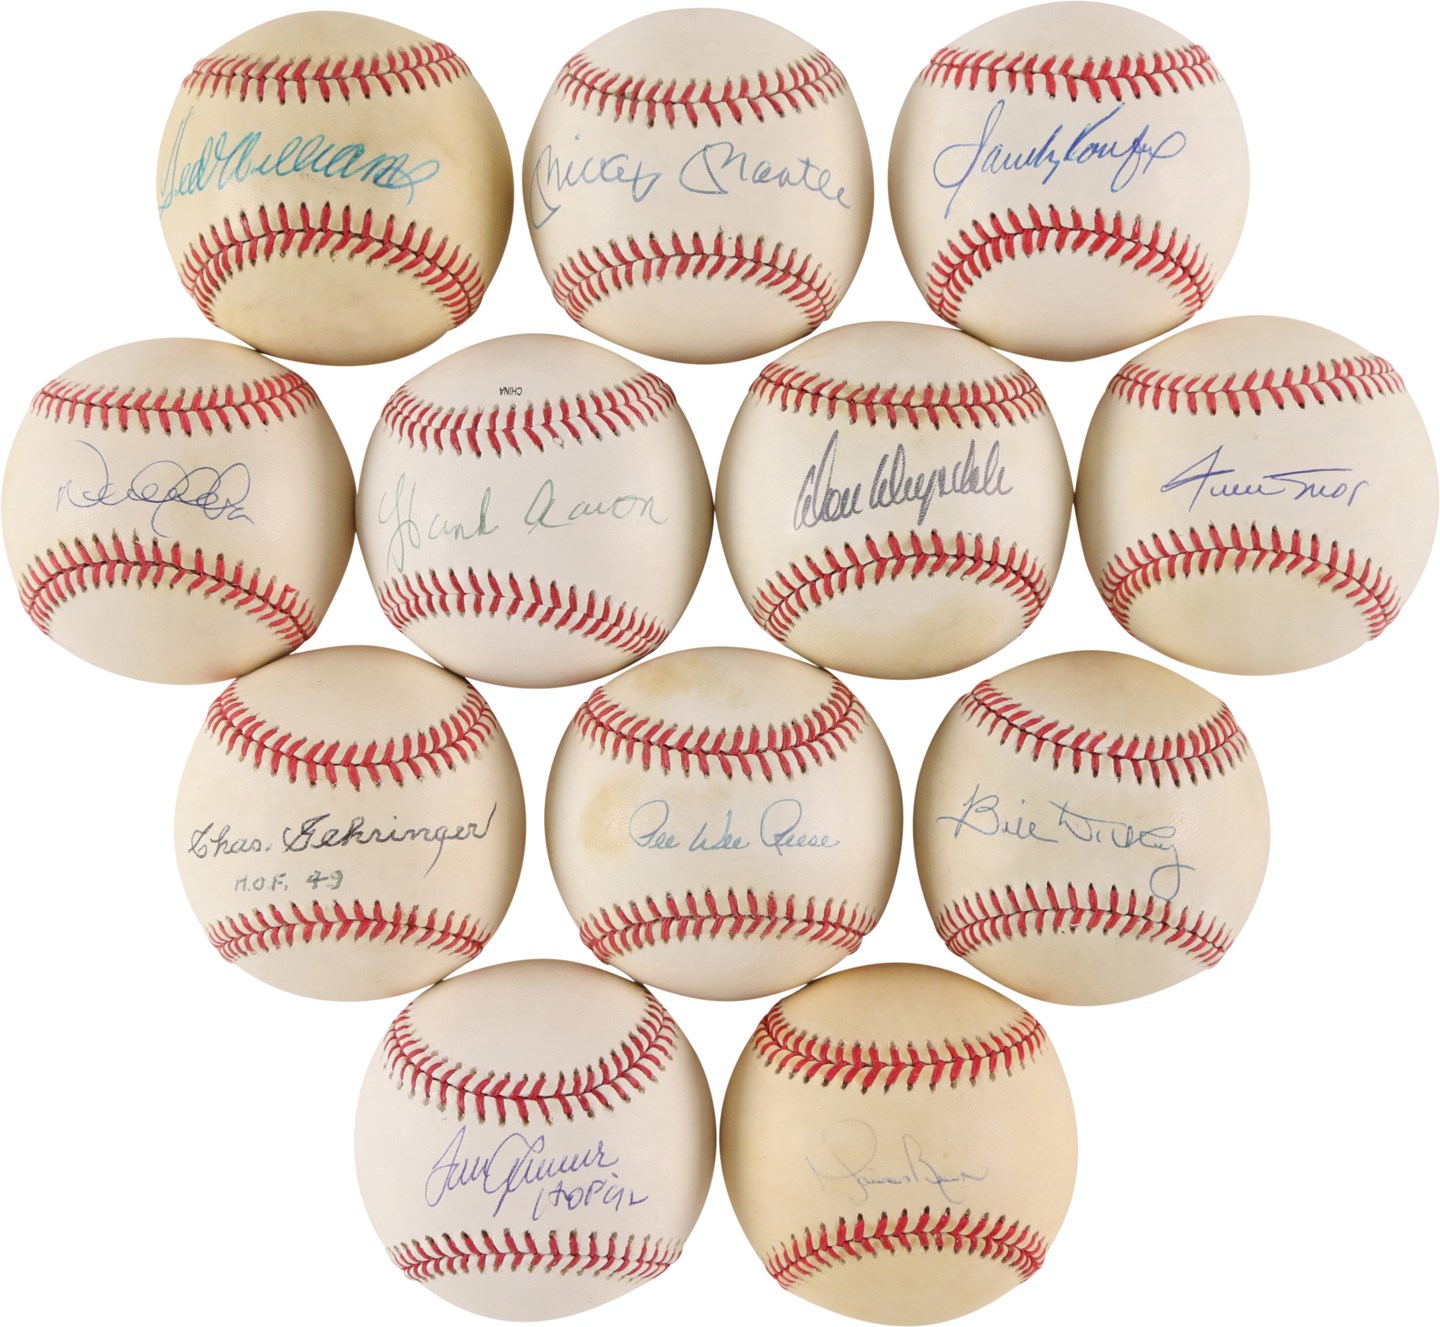 - Hall of Famers Signed Baseball Collection w/Mantle, Williams & Mays (57)